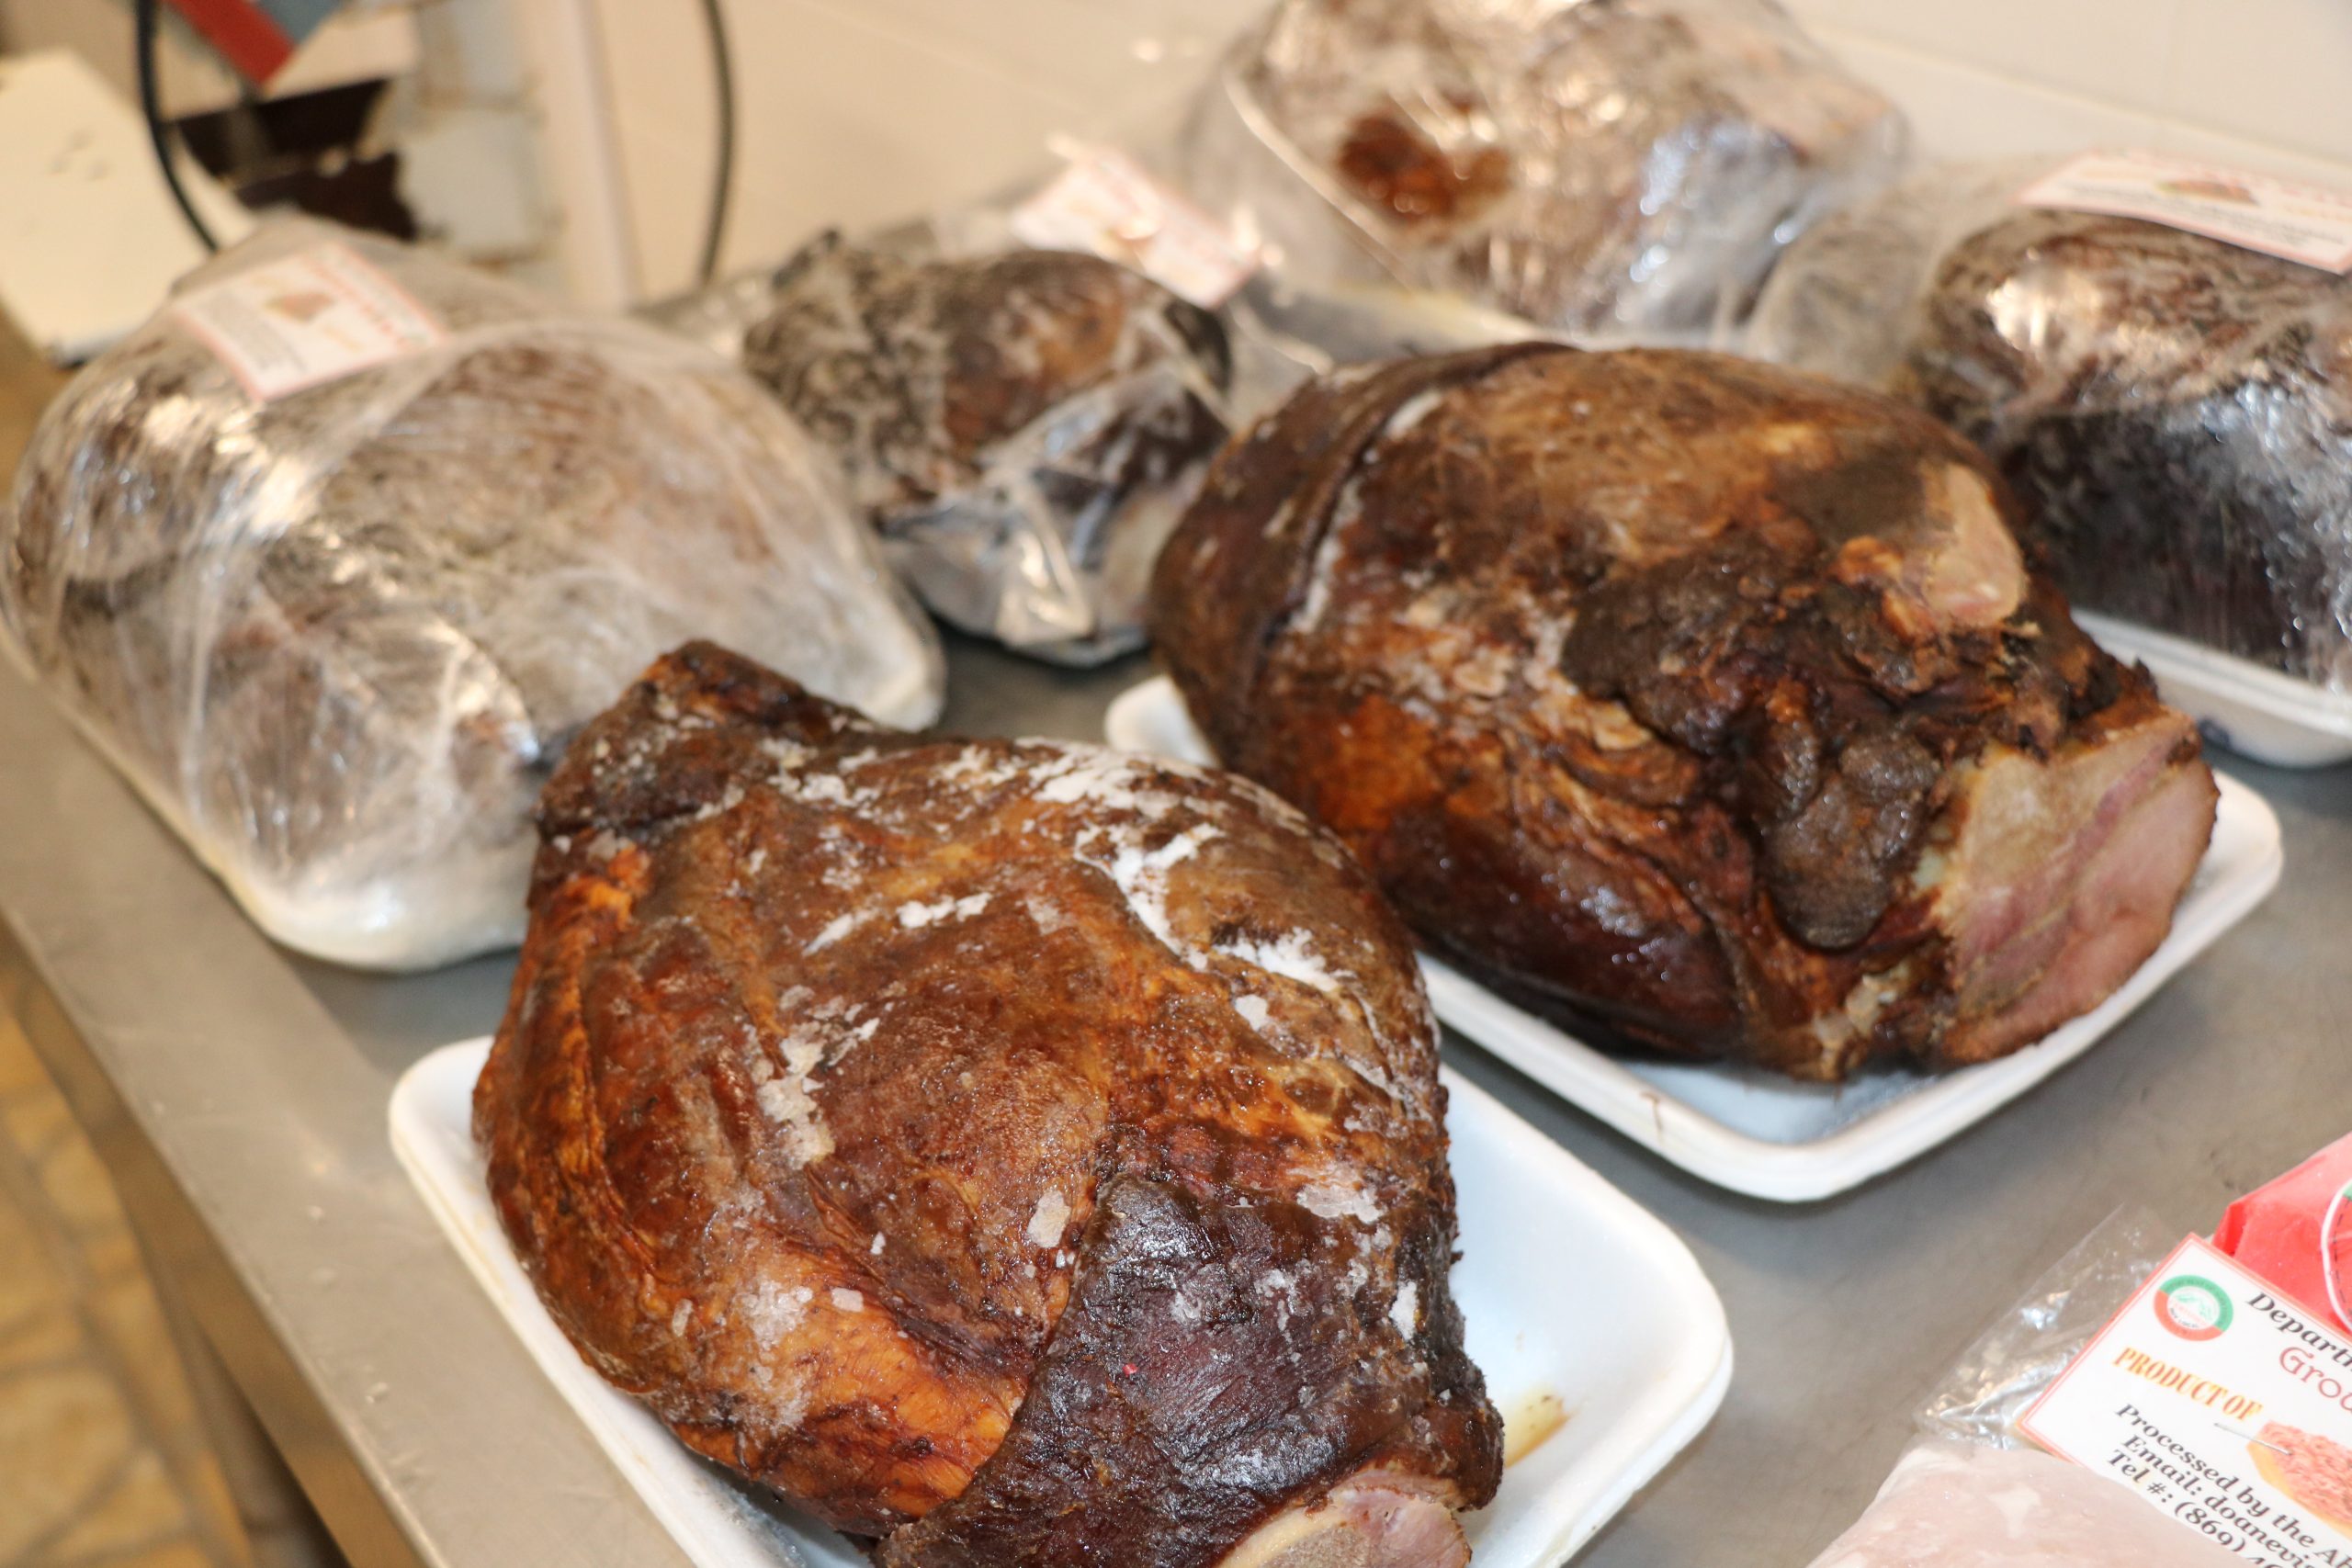 Frozen local smoked hams on November 10, 2021, prepared by the Abattoir Division Abattoir Division in Nevis